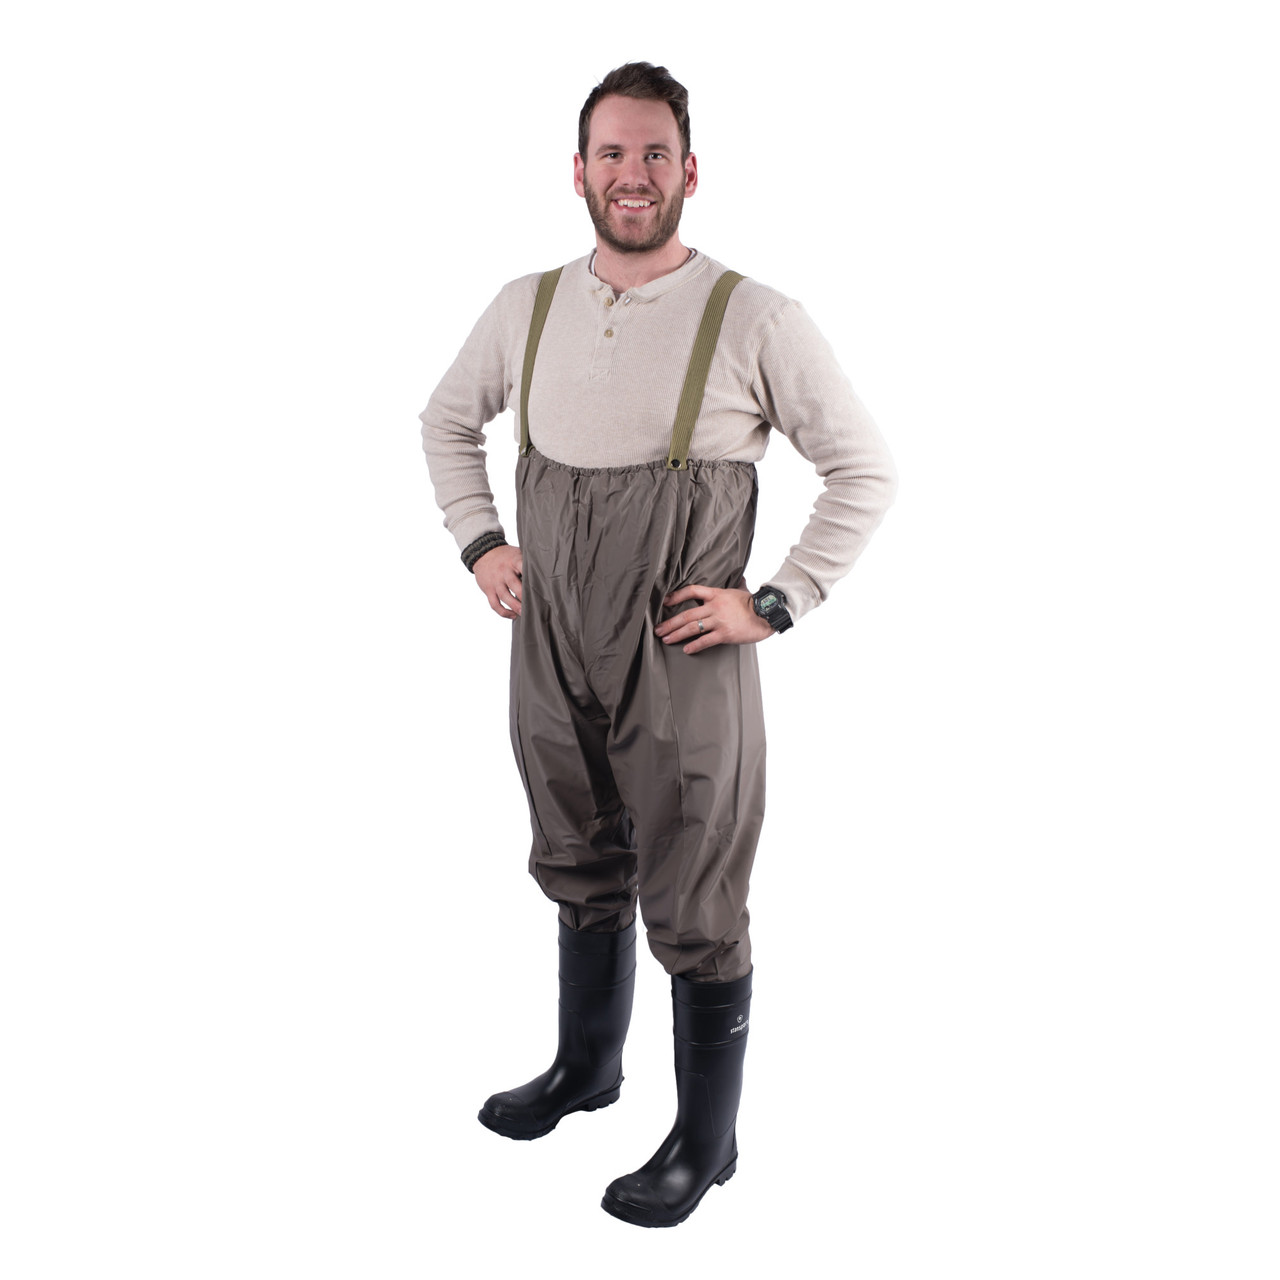 Fishing Wader Fly Fishing Chest Waders Pants with Boots for Men